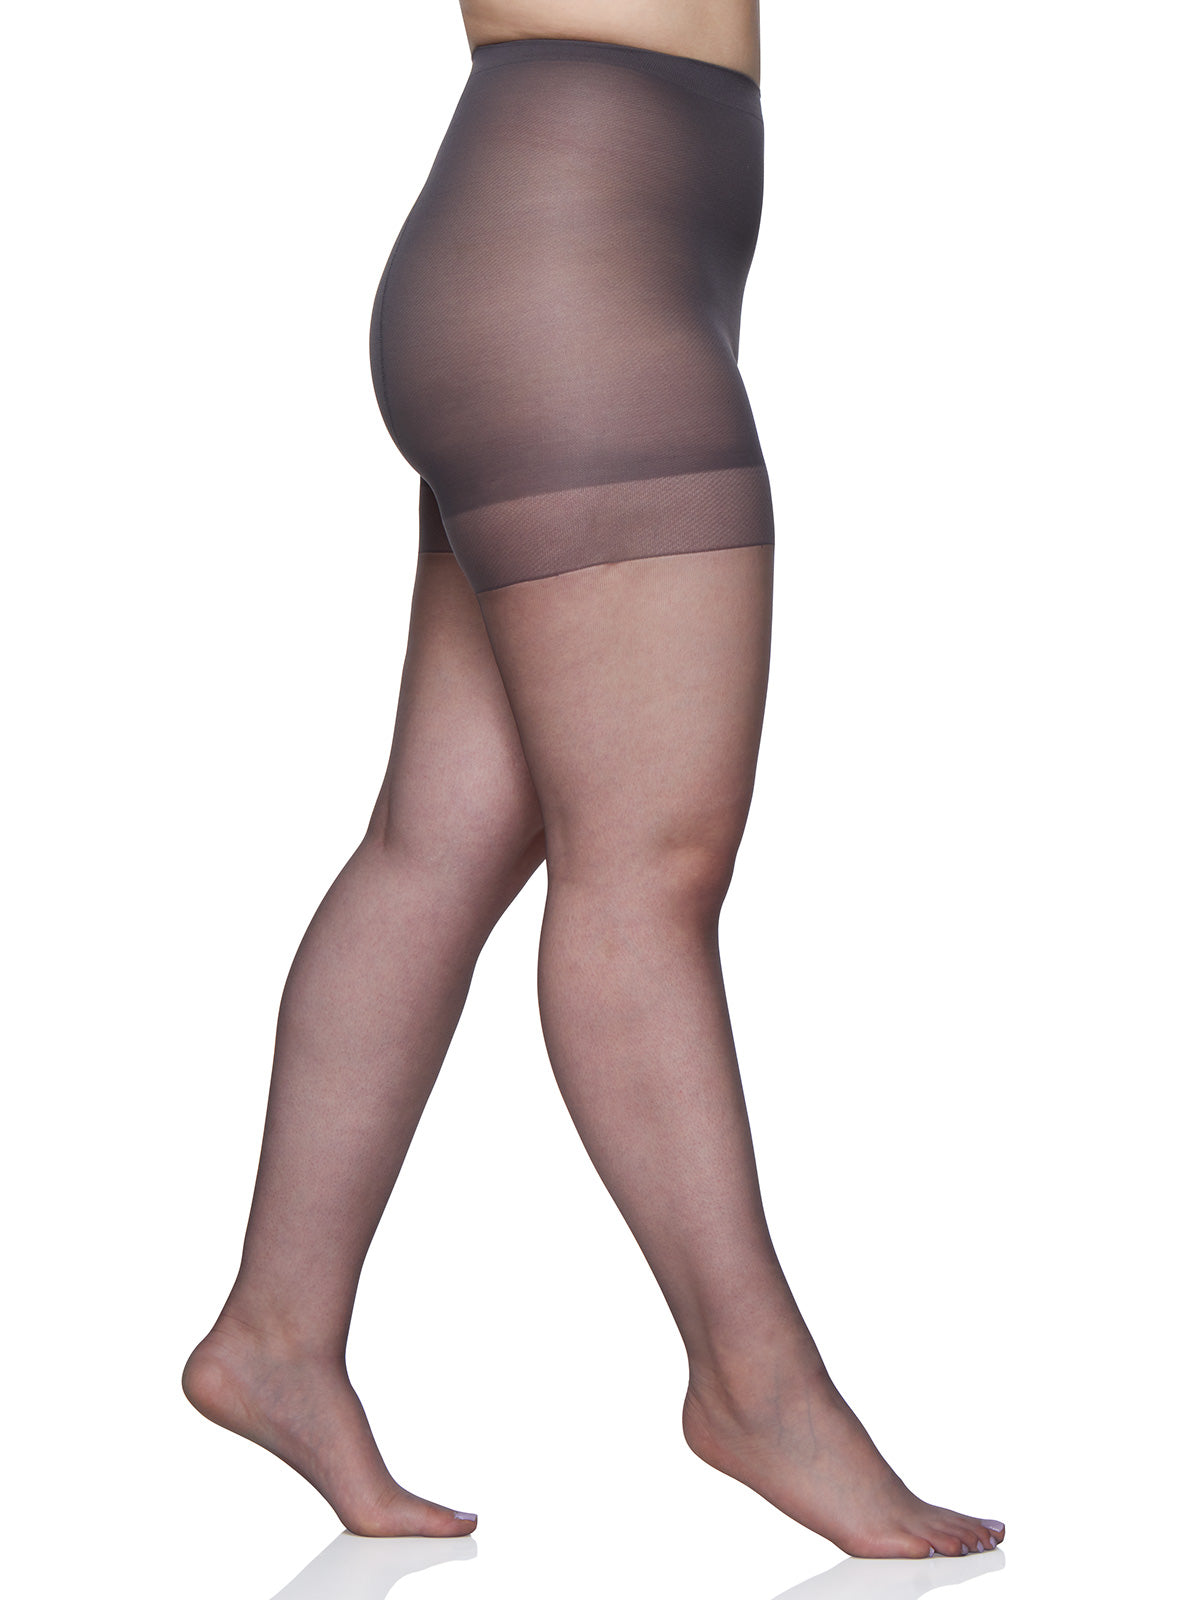 Queen Ultra Sheer Control Top Pantyhose with Sandalfoot Toe - 4411